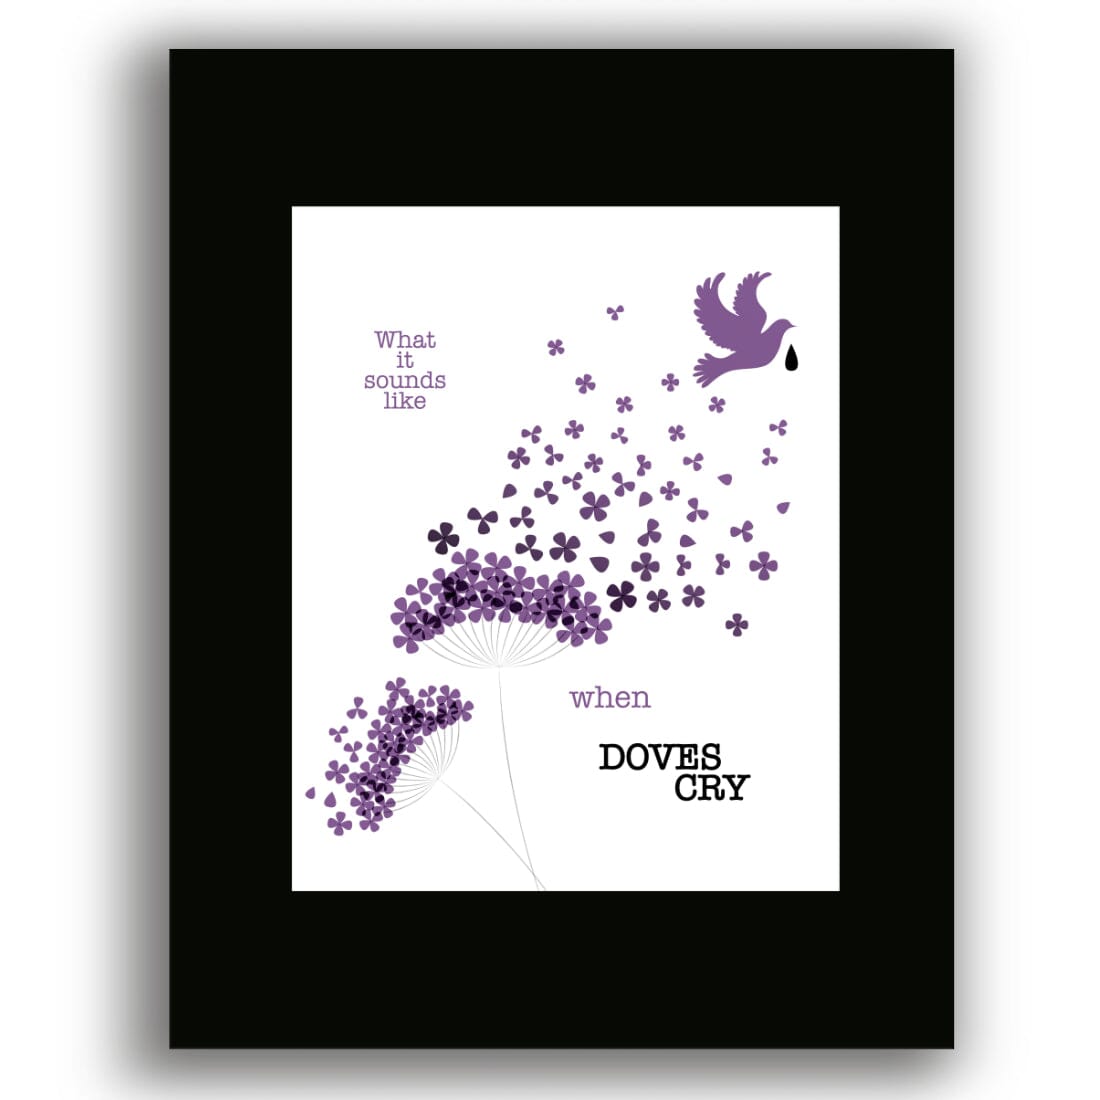 When Doves Cry by Prince - Song Lyrics Wall Art Print Poster Song Lyrics Art Song Lyrics Art 8x10 Black Matted Print 